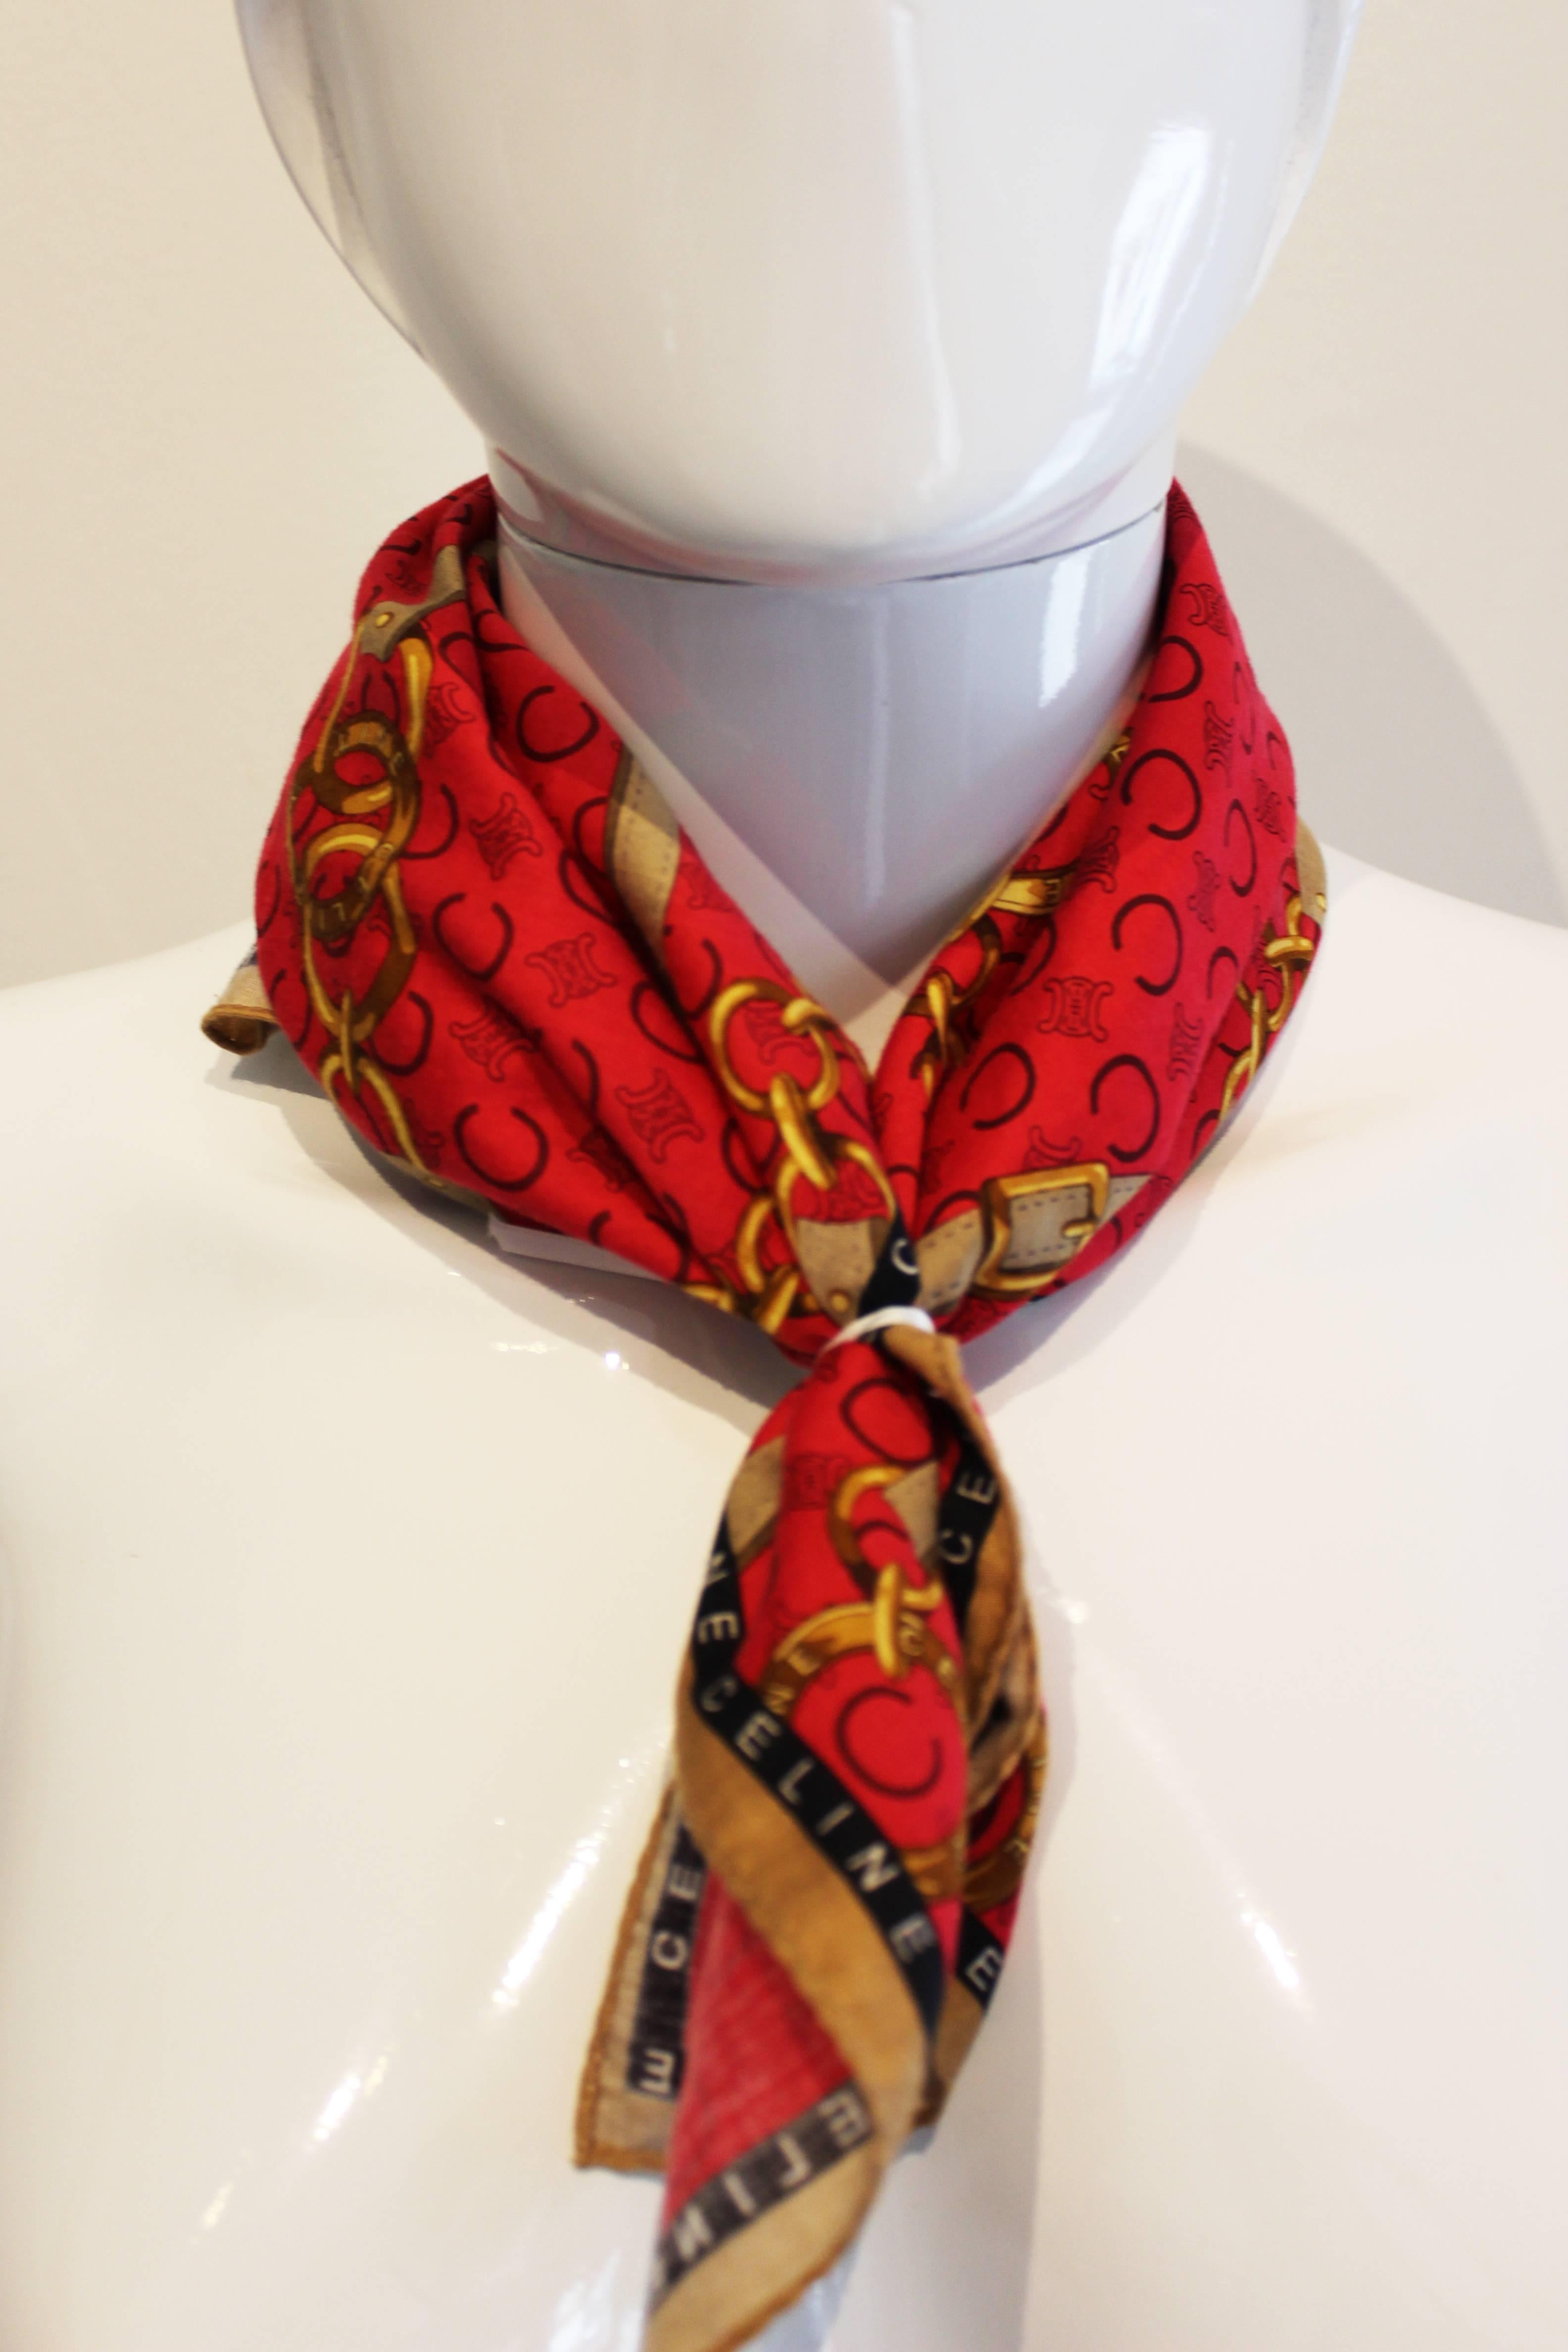 A super little scarf for Summer by French house of Celine. This scarf has a biscuit coloured border,with an inner black border with Celine printed on it.
The body of the scarf is a deep raspberry pink colour, with the letter C, Celine logo and